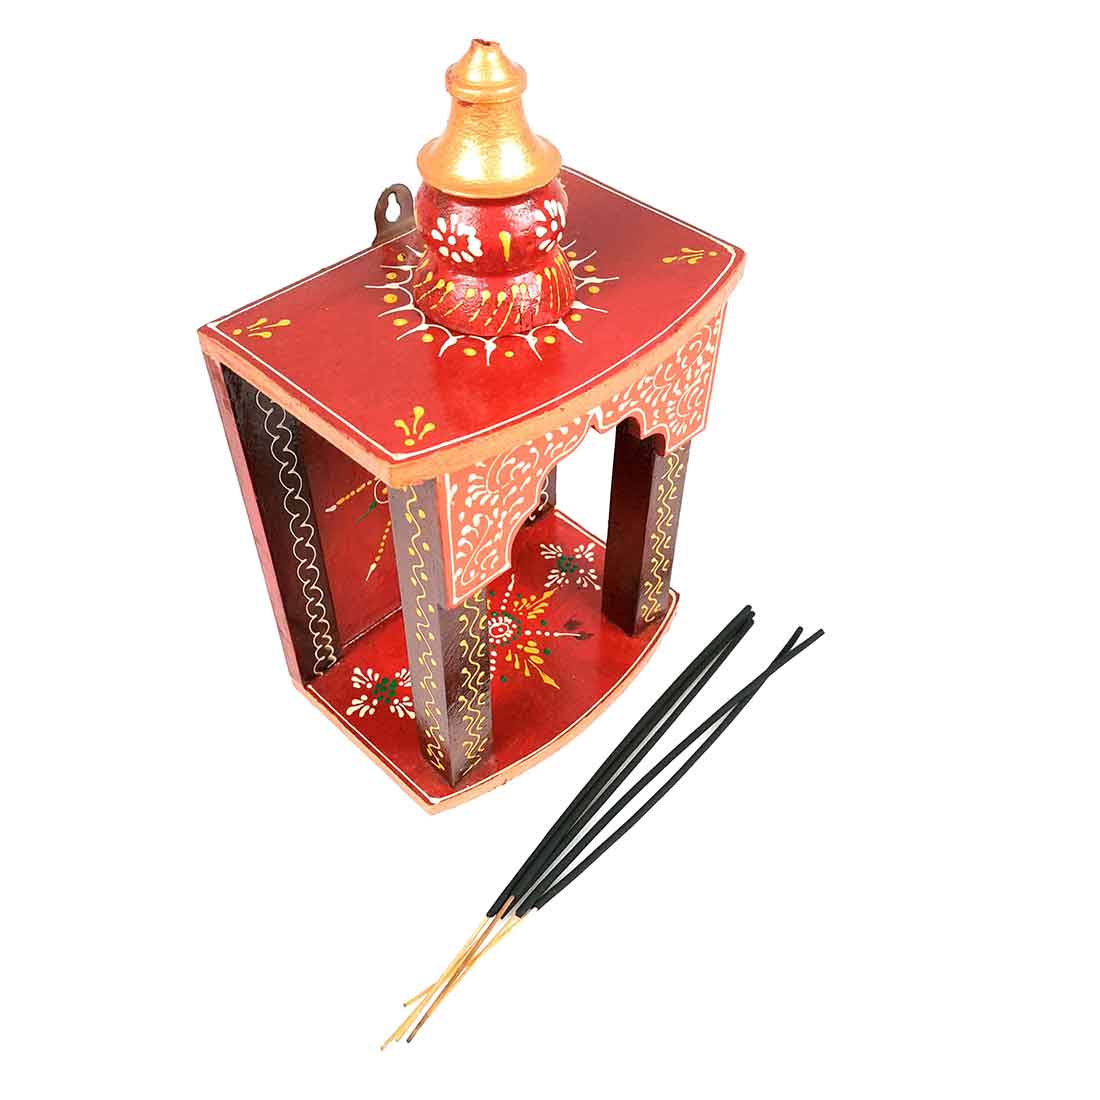 Pooja Mandir for Your Puja Ghar | Wooden Wall Hanging Puja Stand | God Temple For Home Office & Shop With Detachable Gumbad - 10 Inch